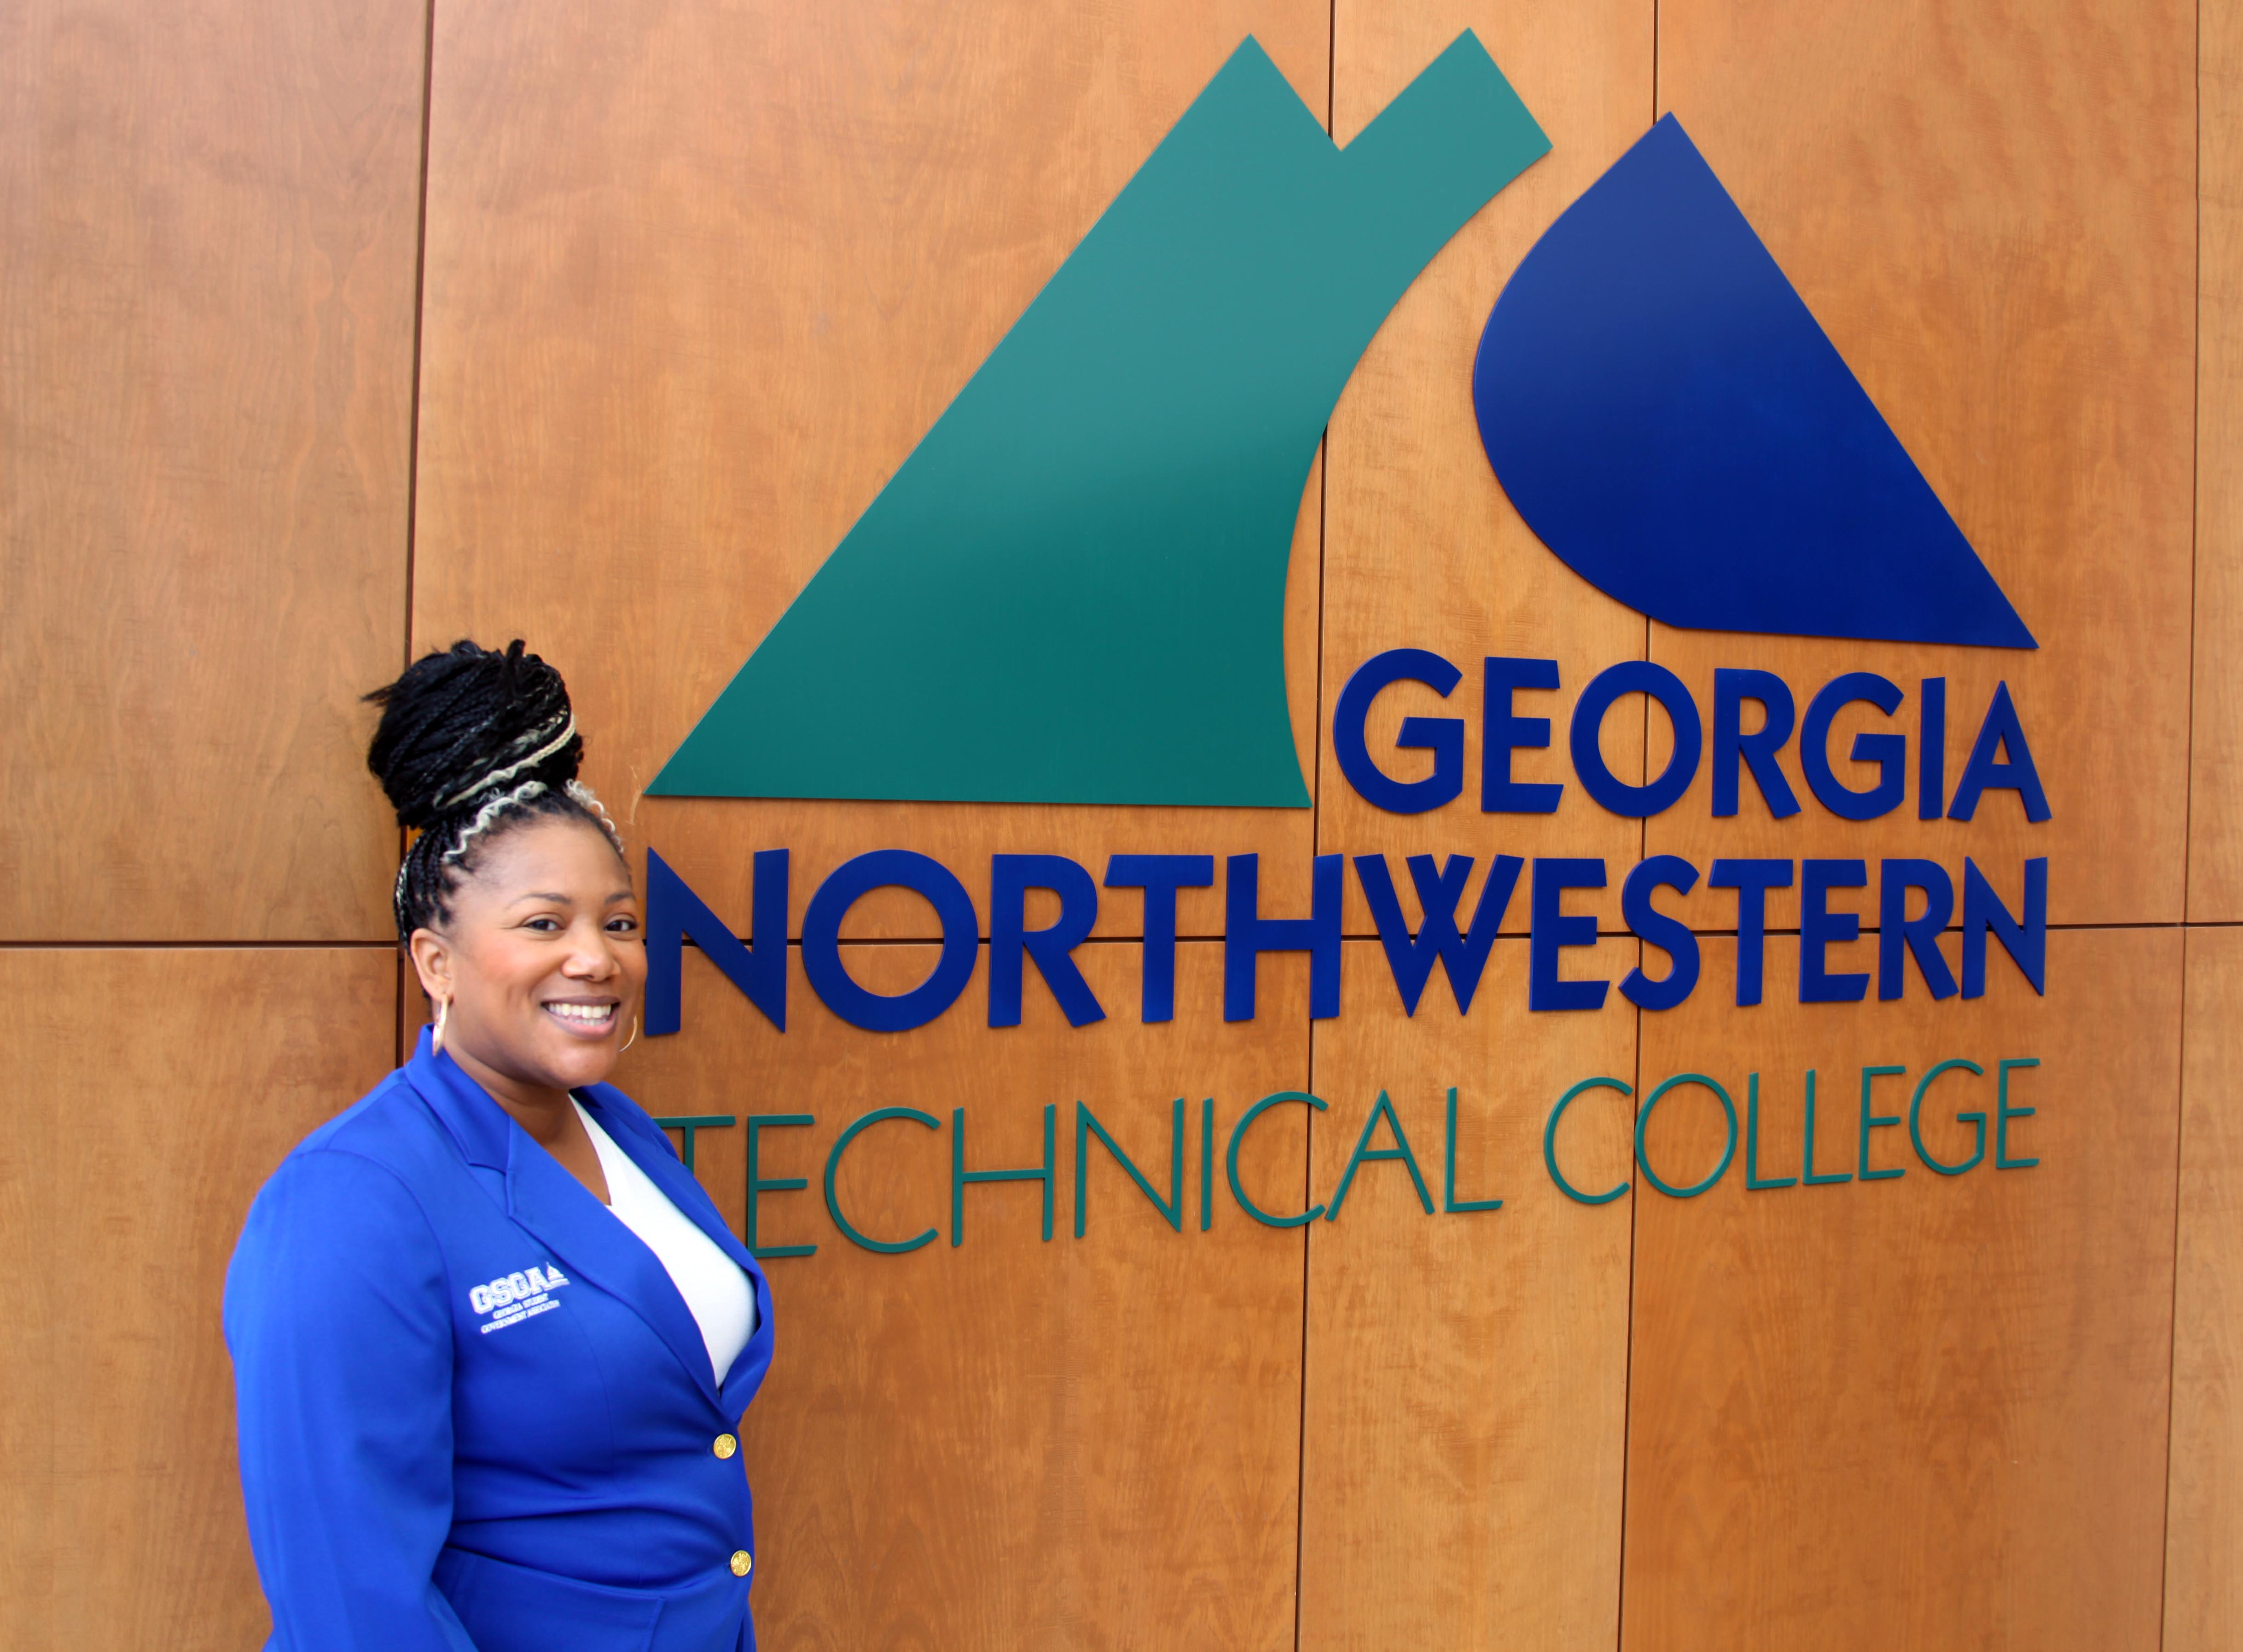 GNTC student Tatiana Edwards will serve as president of the Georgia Student Government Association for the 2020-21 year.